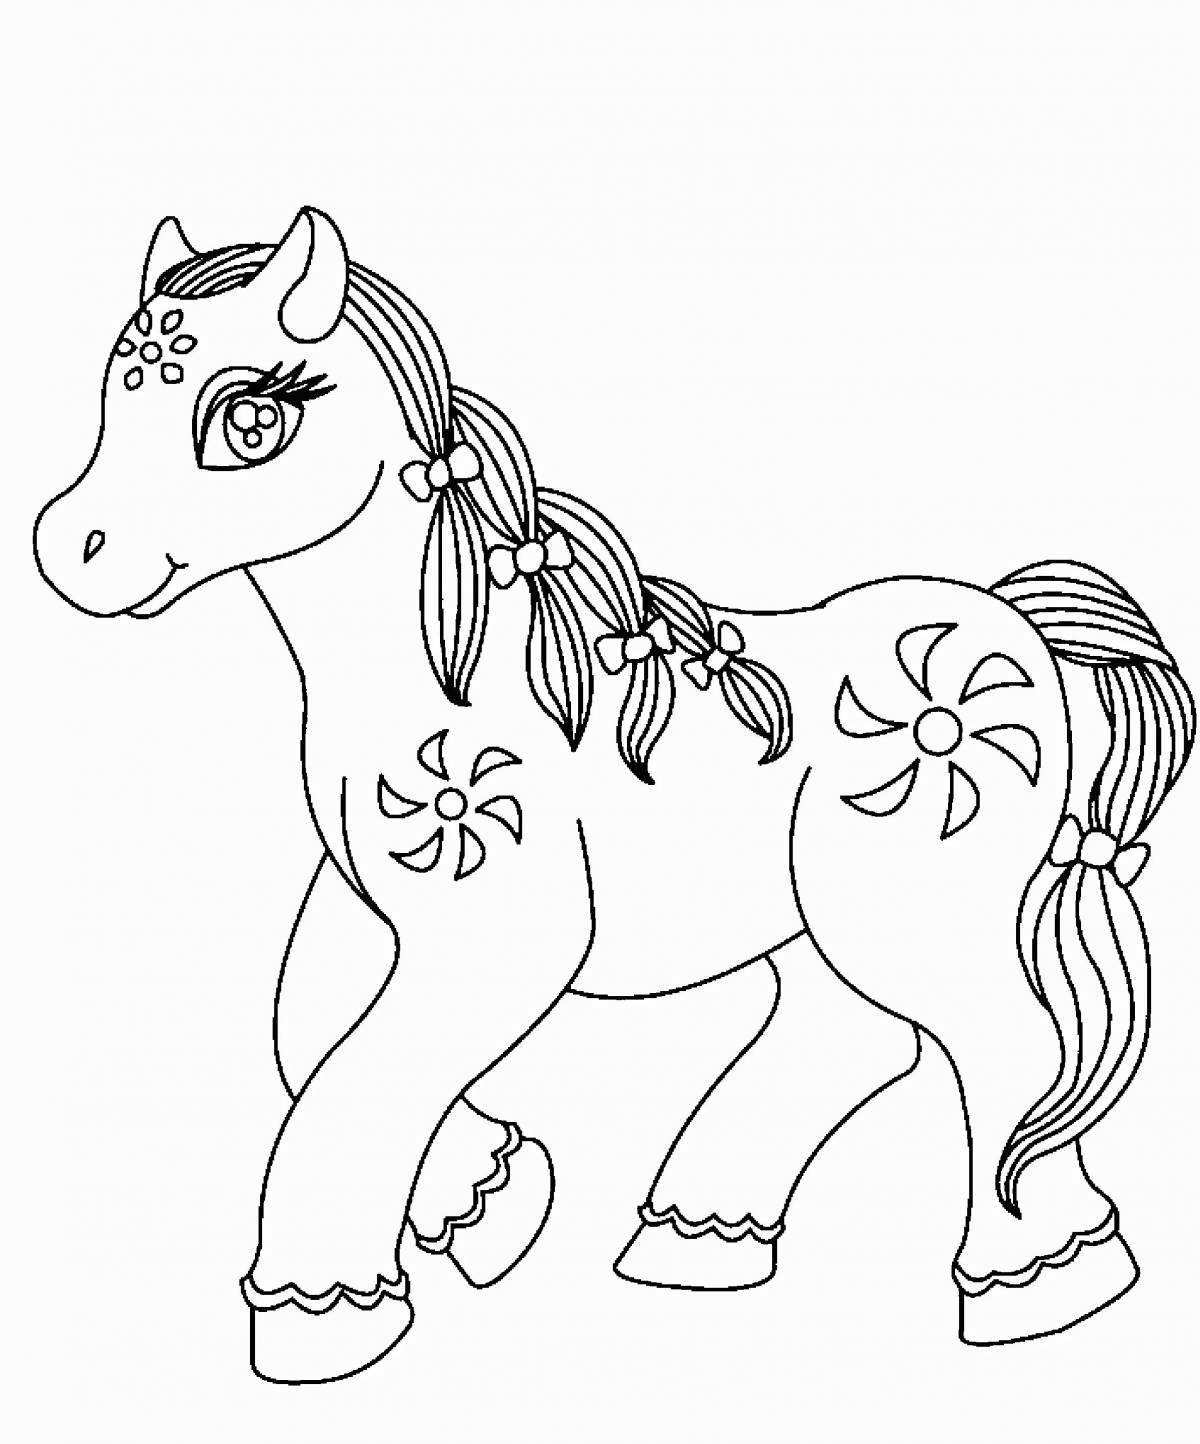 Bright horse coloring page